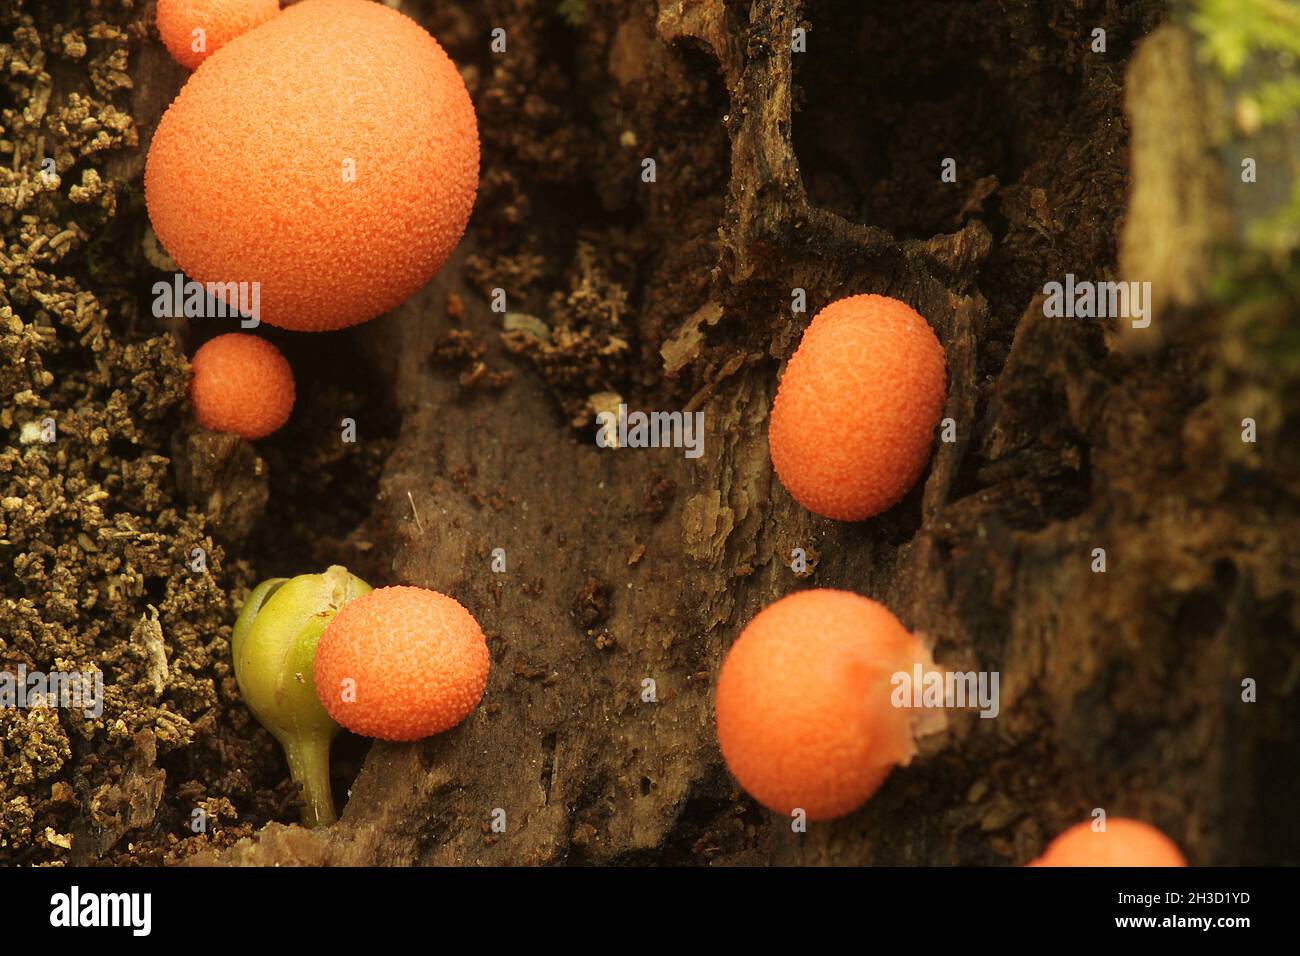 Fruiting bodies of wolf's milk slime mold (Lycogala epidendrum) Stock Photo